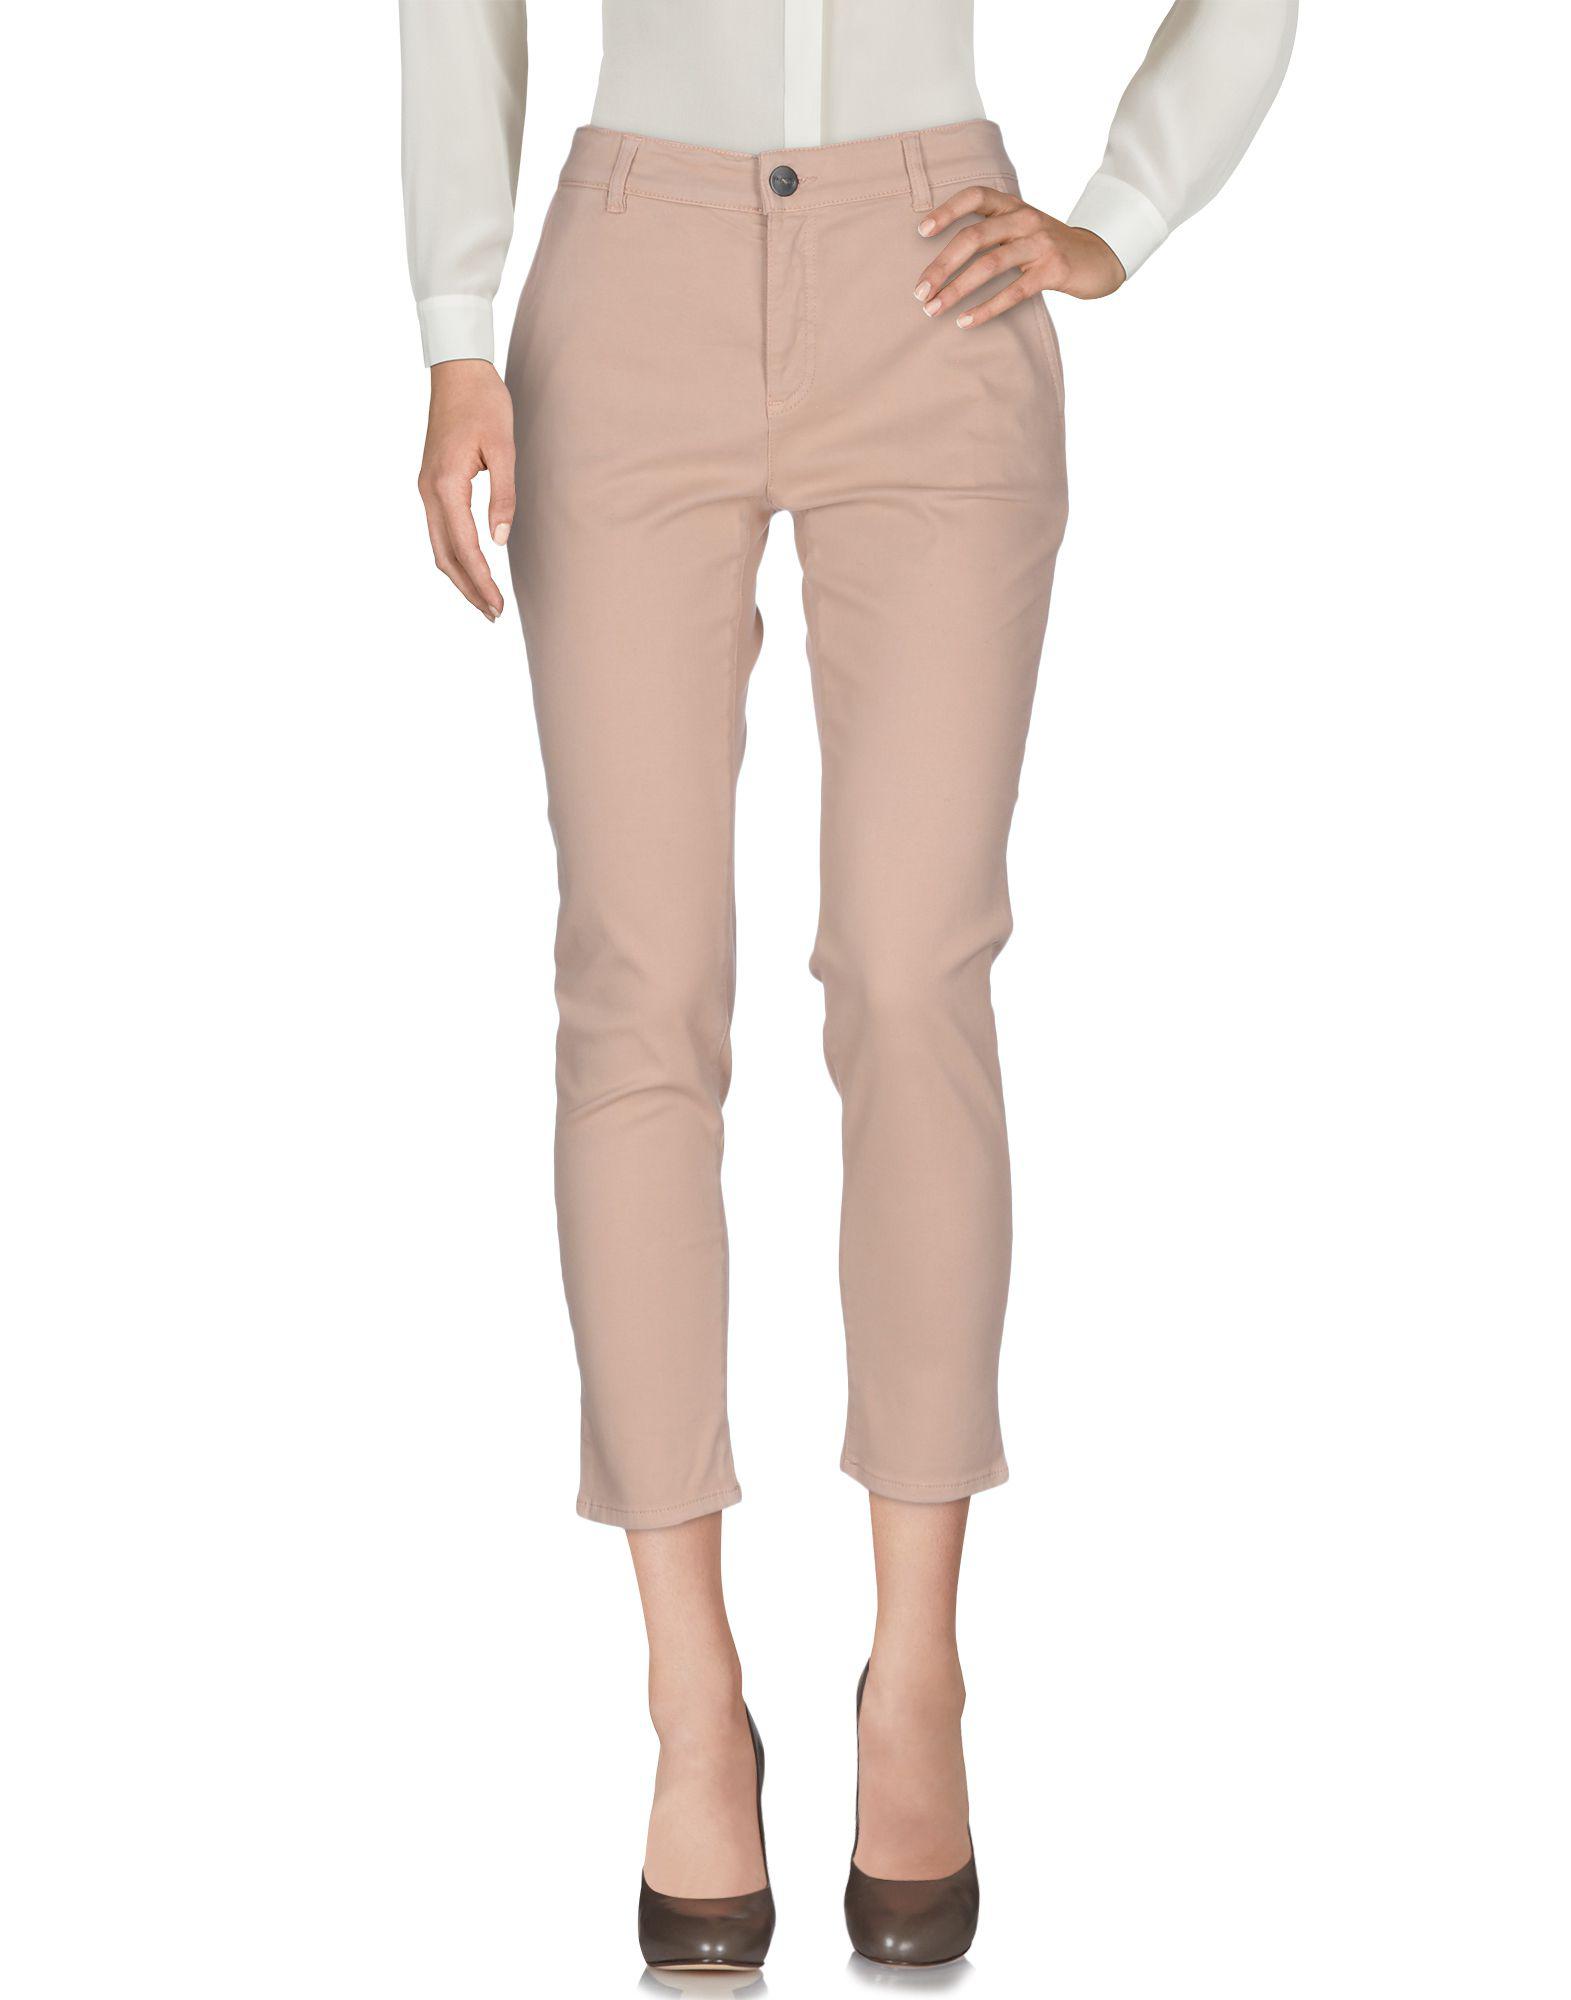 Pinko Cotton Casual Pants in Pastel Pink (Pink) - Save 4% - Lyst